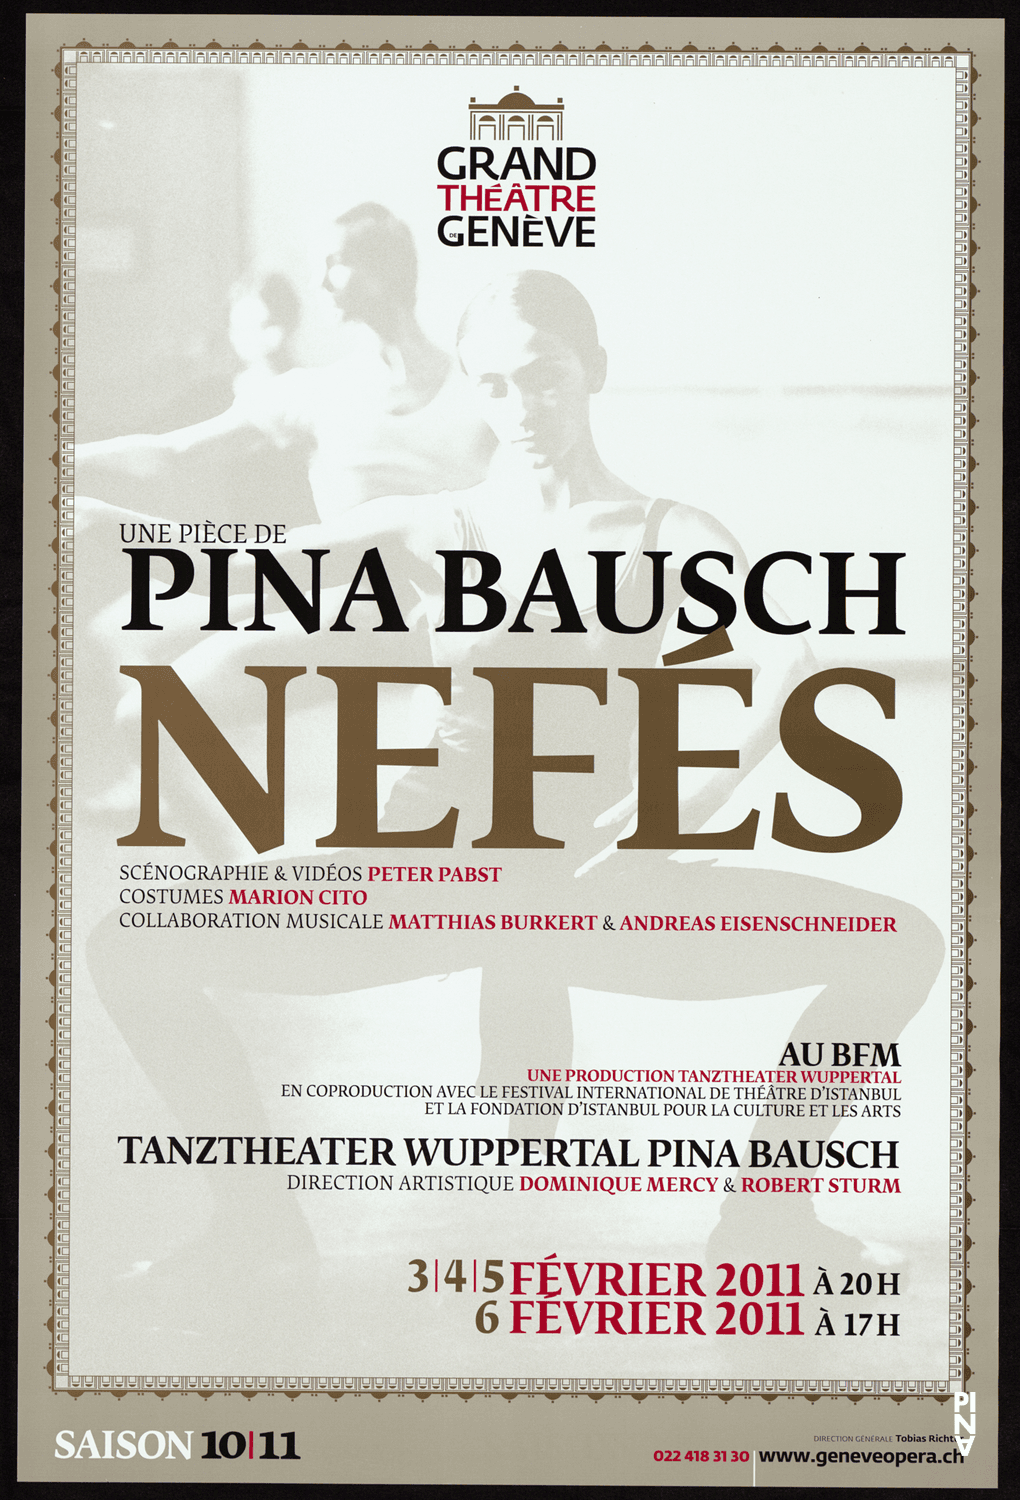 Poster for “Nefés” by Pina Bausch in Geneva, 02/03/2011 – 02/06/2011